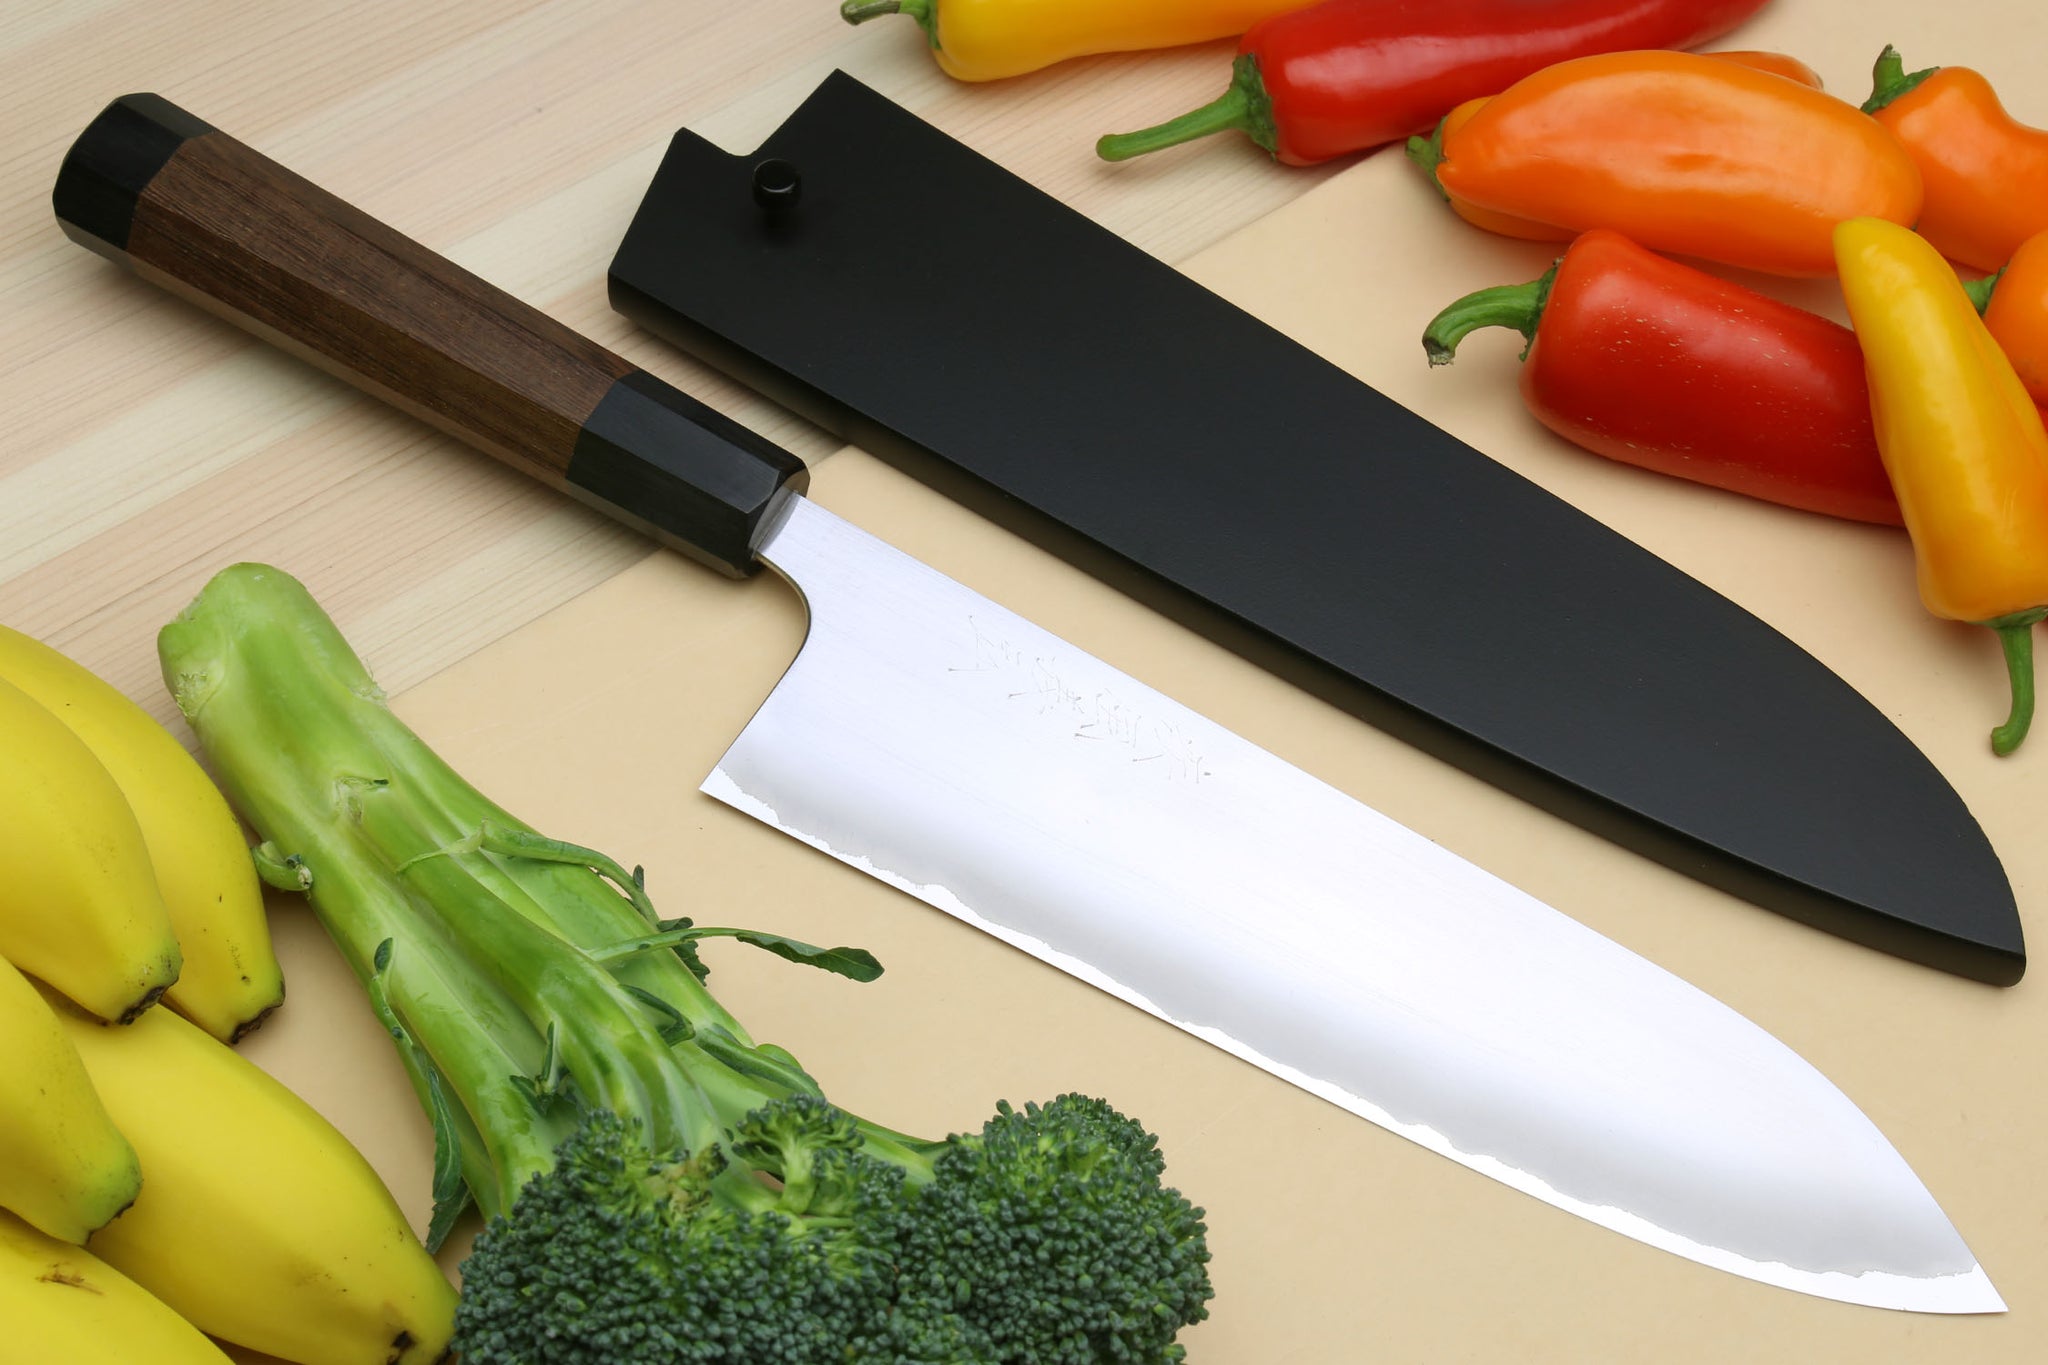 Yoshihiro Super Blue Steel Stainless Clad Gyuto Chefs Knife